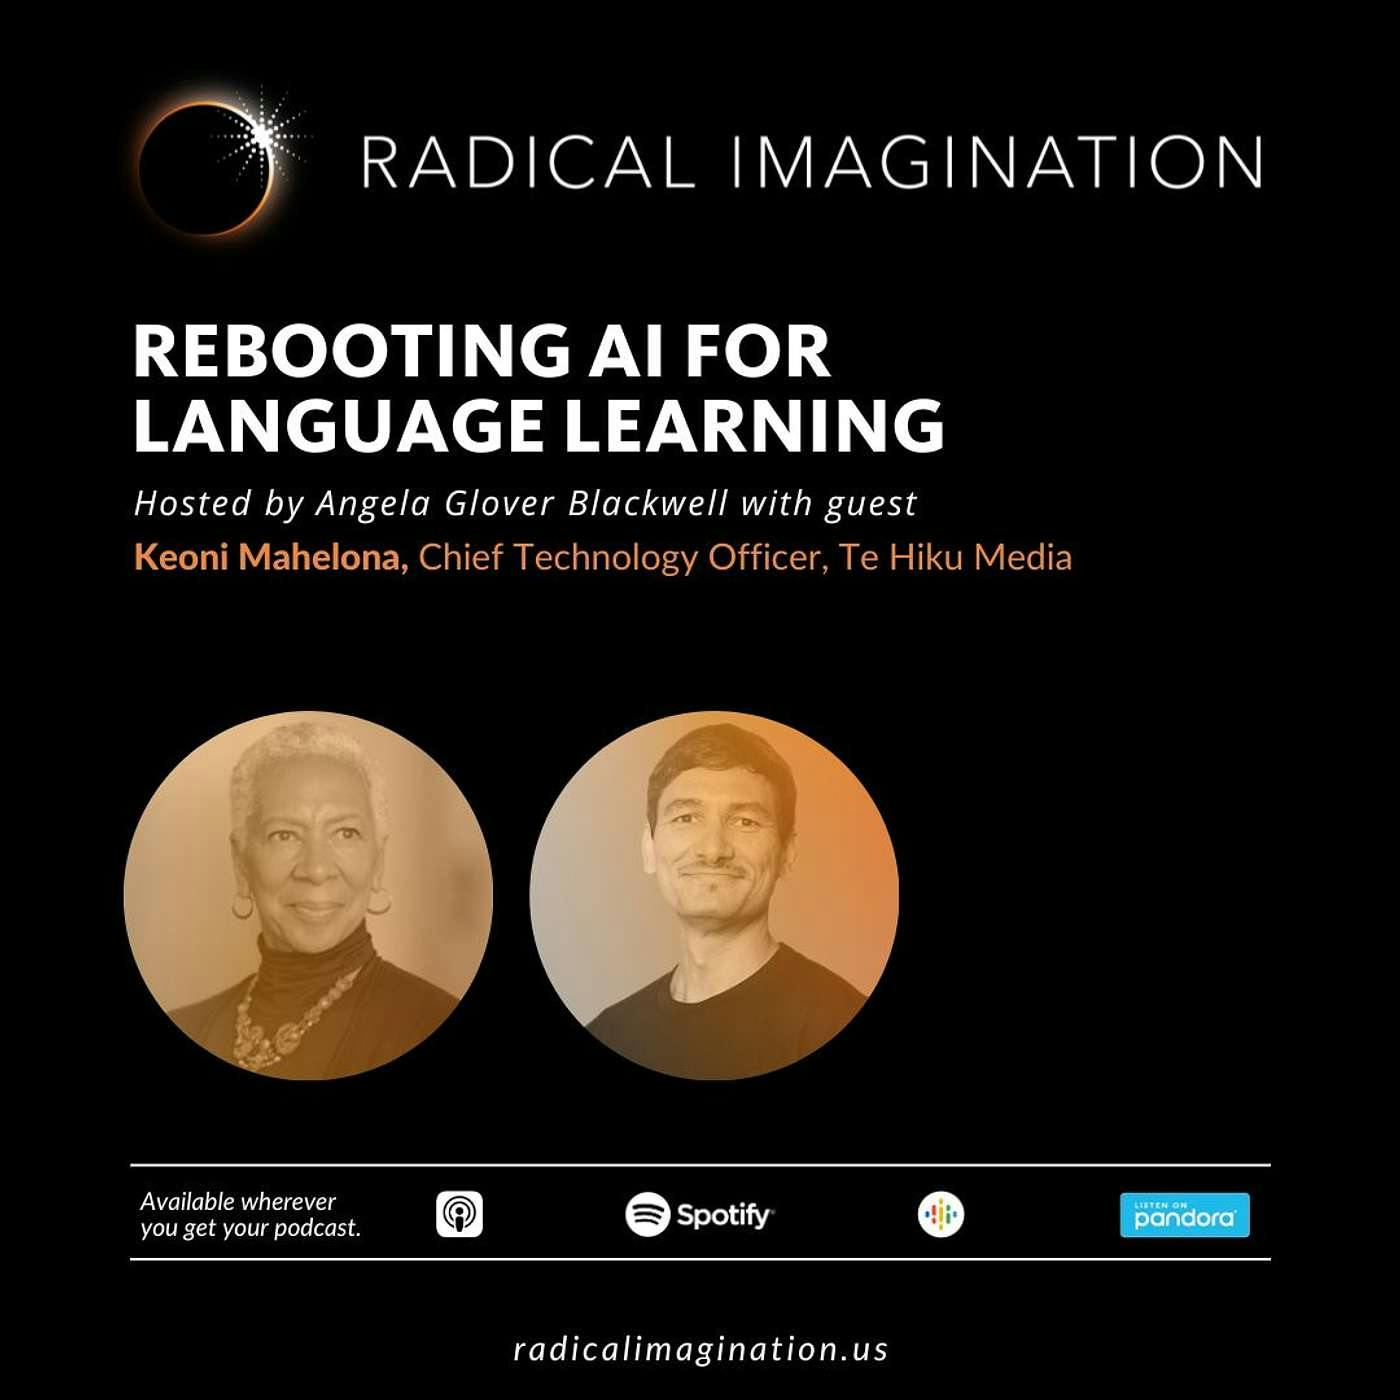 Rebooting AI for Language Learning